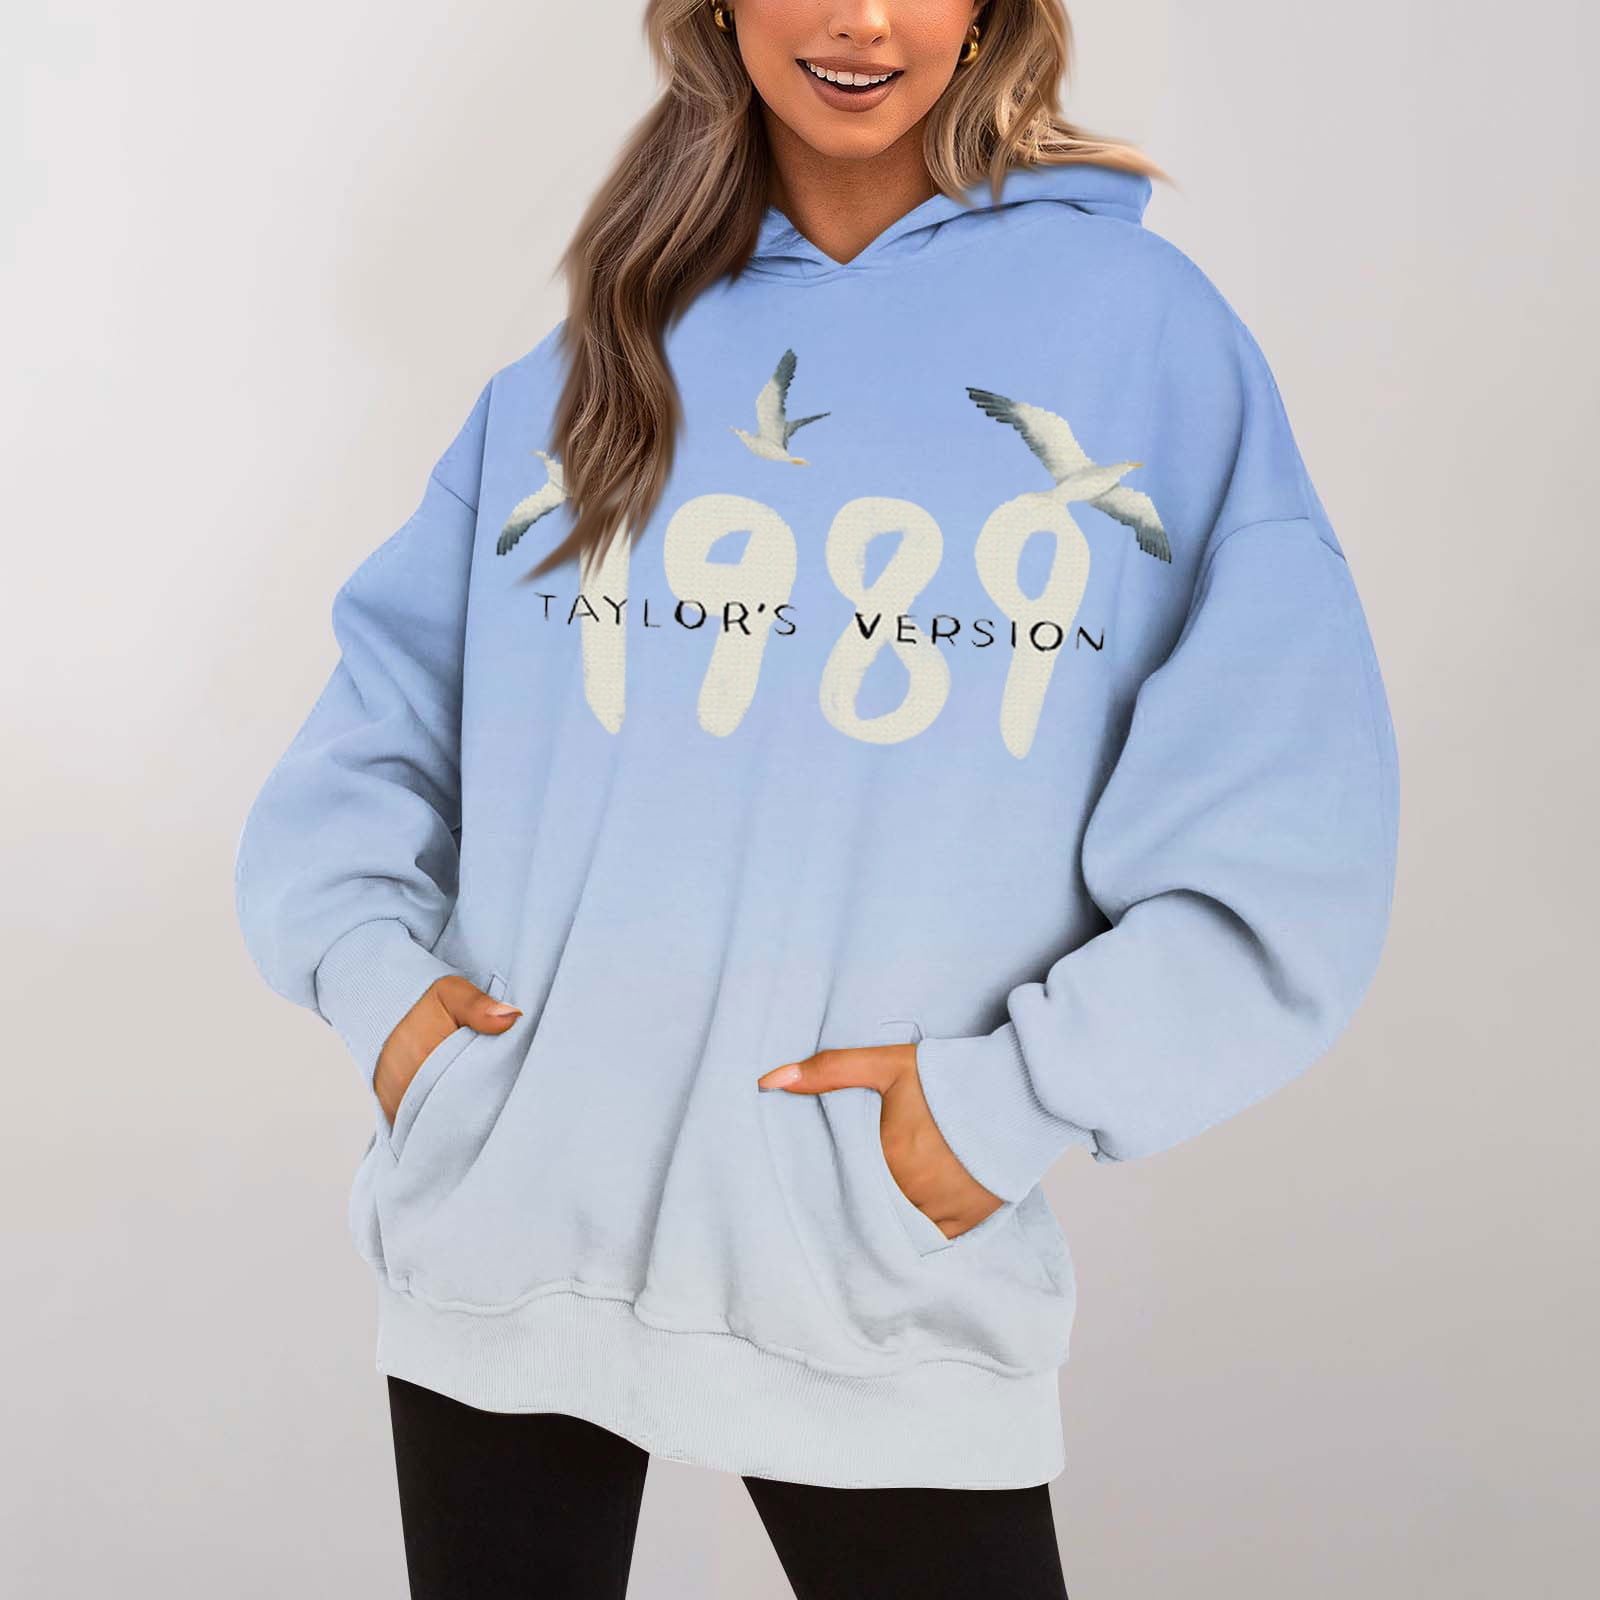 1989 TayIor Swift's Hoodie,TayIor Swift's Sweatshirt,Women's Oversized  Sweatshirt Pullover Hoodie Long Sleeves with Pockets Winter Fall Clothing  Solid Color Pullover Sports Workout Casual Clothes 